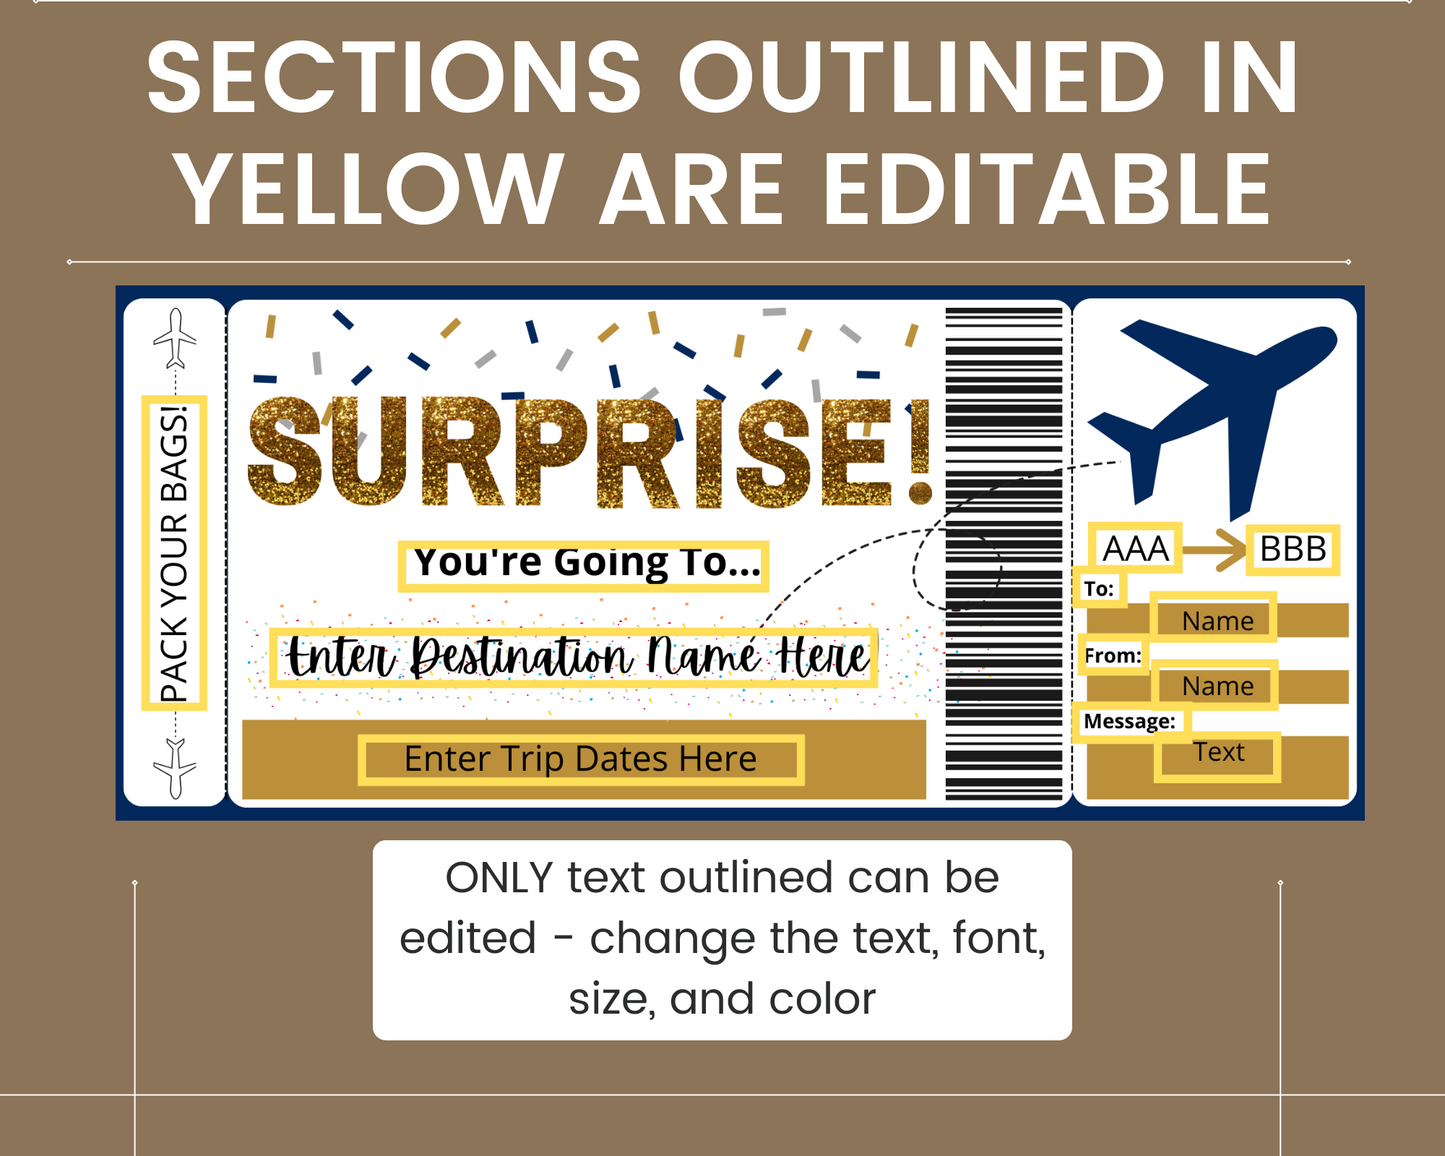 Surprise Boarding Pass Gift Ticket Template